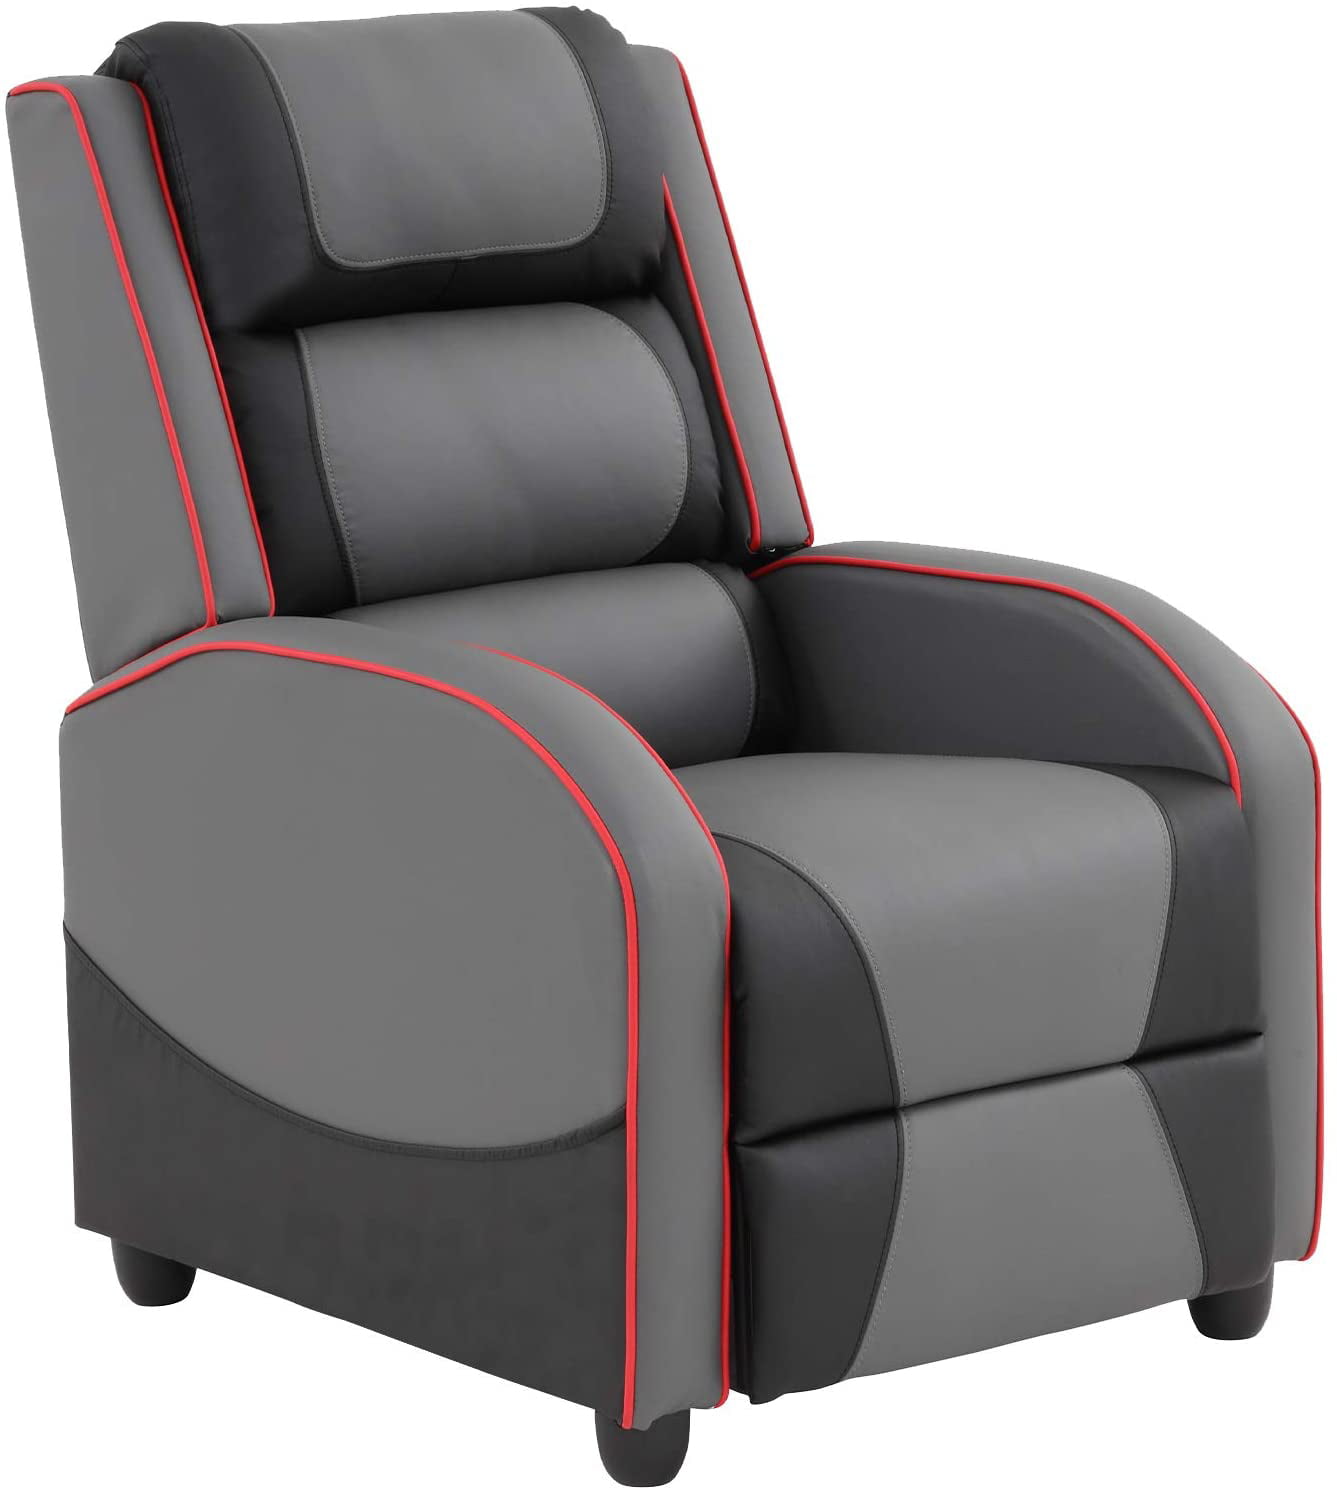 Recliner Chair Gaming Recliner For Adults Video Game Chairs For Living Room Comfortable Walmart Com